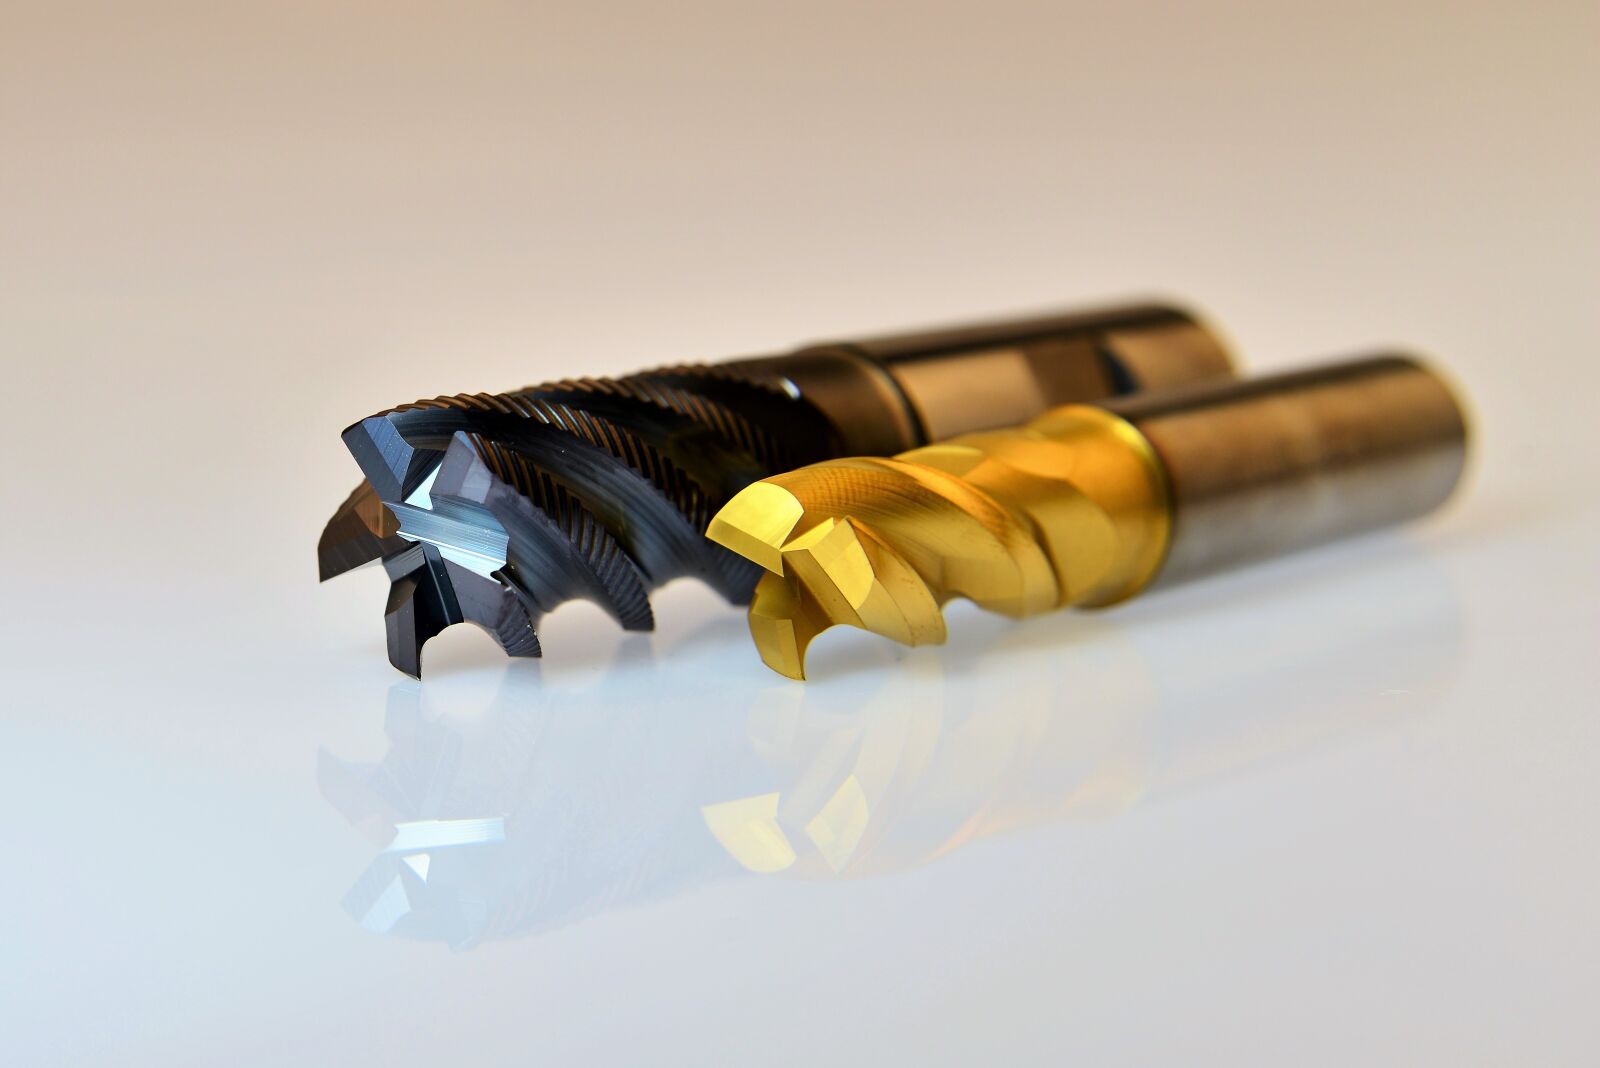 Nikon D800 sample photo. Milling cutters, end mill photography